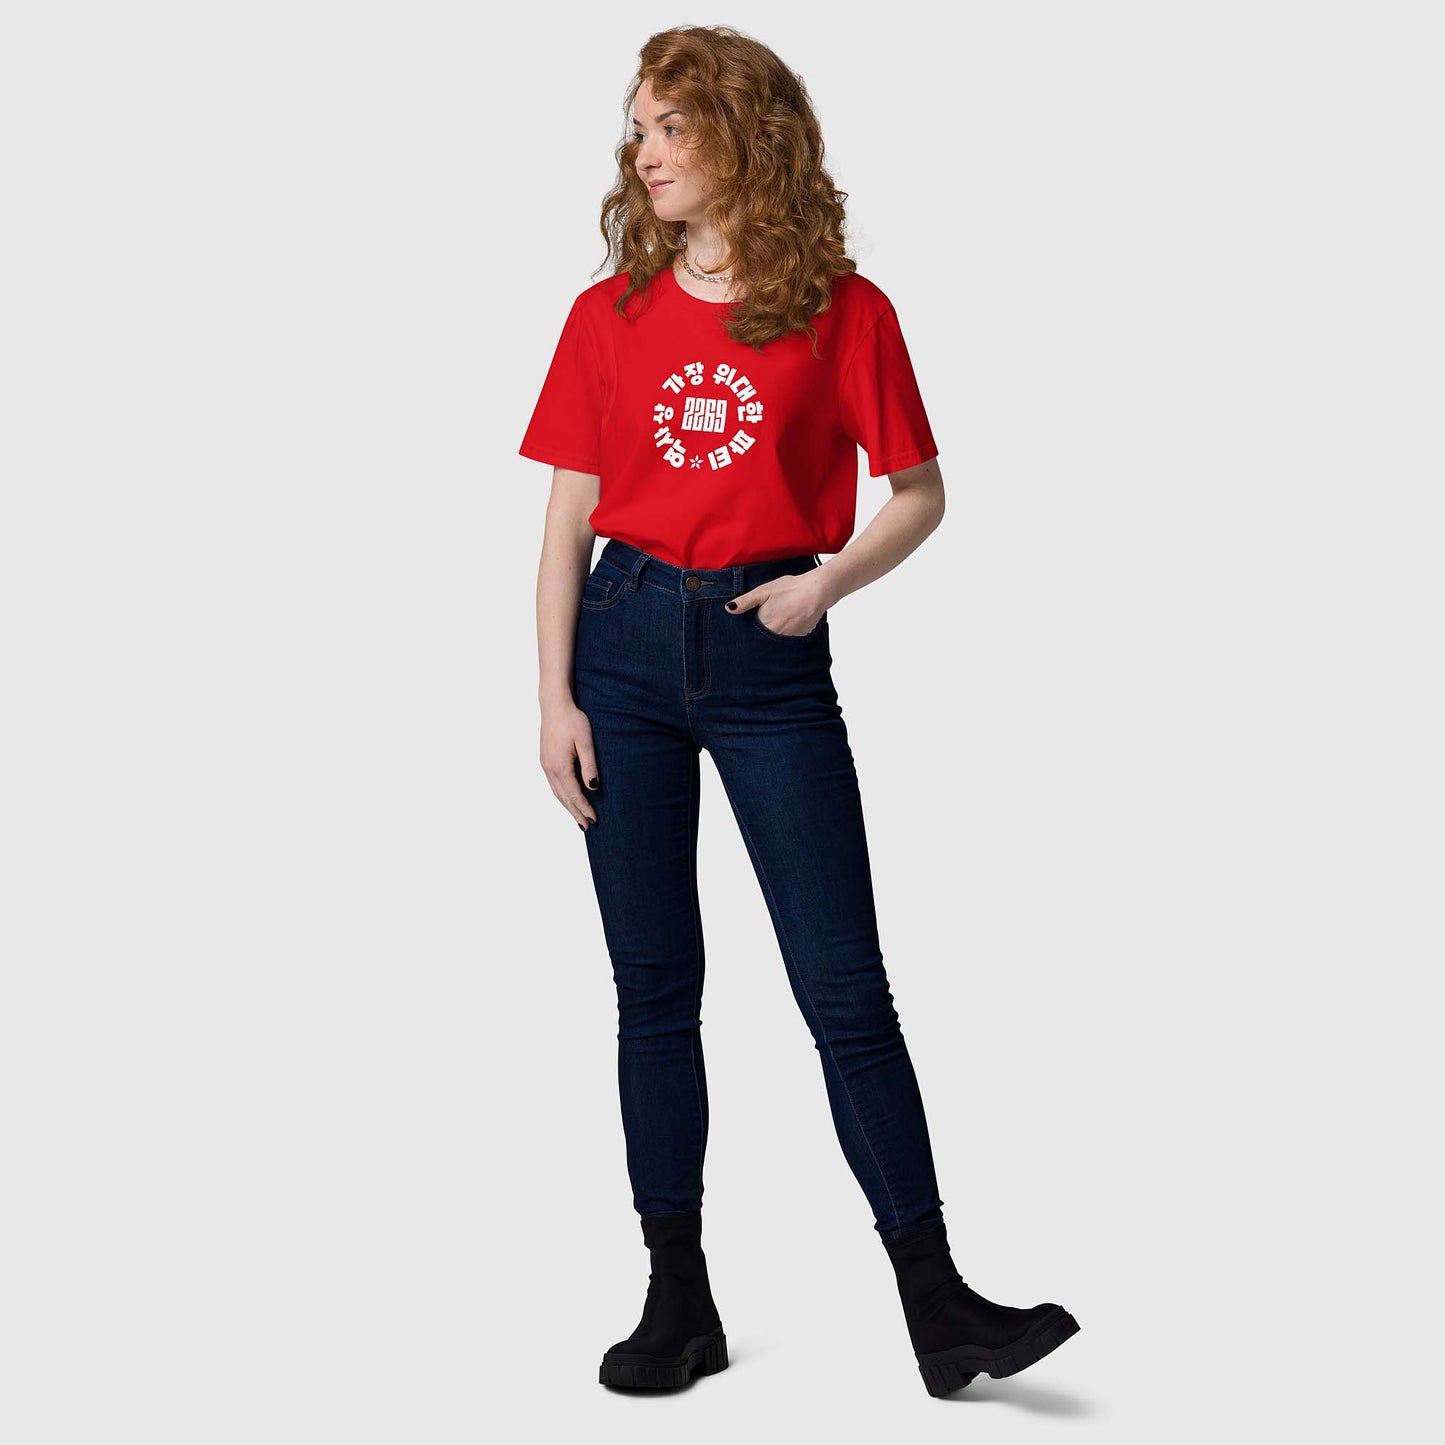 Unisex red organic cotton t-shirt with Korean 2269 party circle